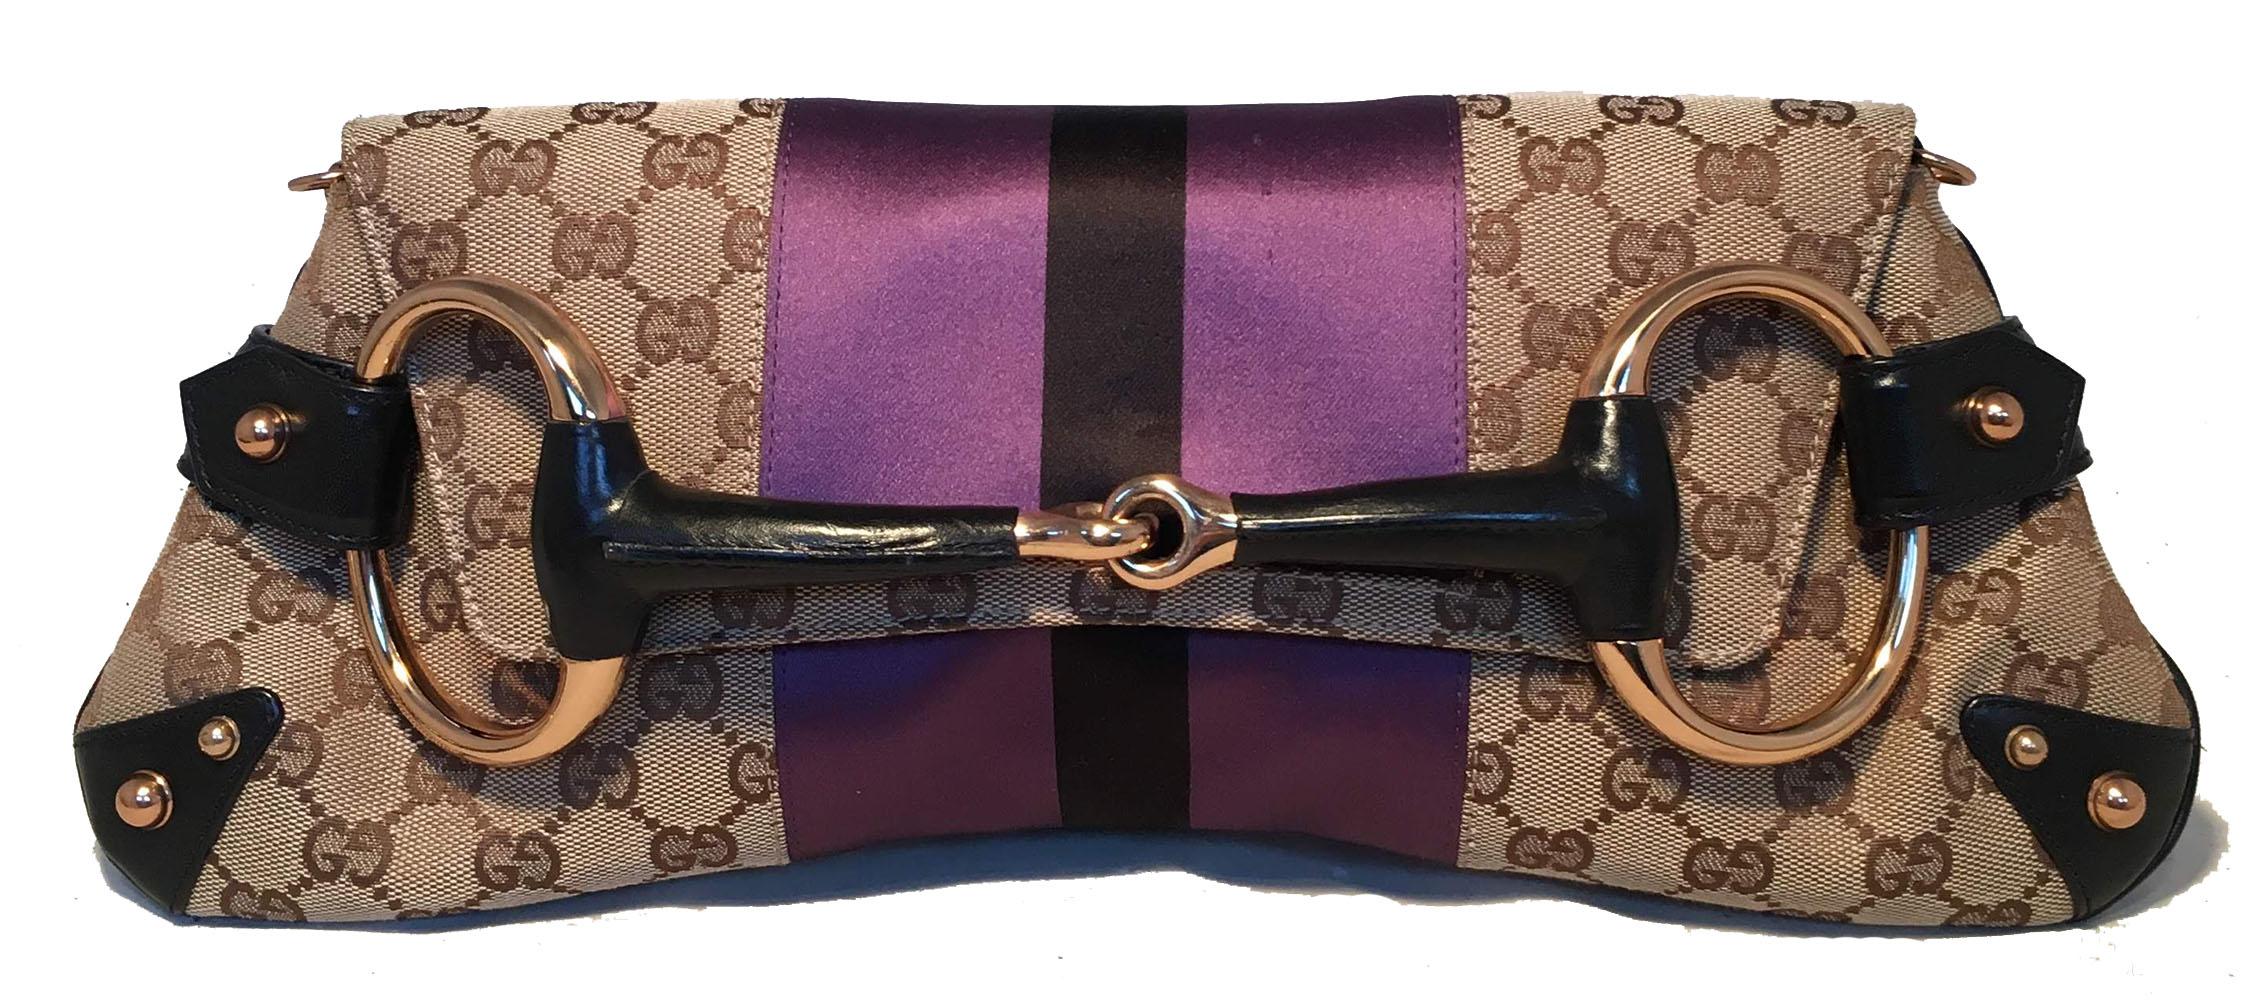 Gucci Monogram Canvas Satin Stripe Harness Horsebit Chain Clutch in excellent condition. Signature monogram canvas exterior trimmed with centered purple and black satin stripes, black leather, and gold hardware. Lifting flap snap closure opens to a